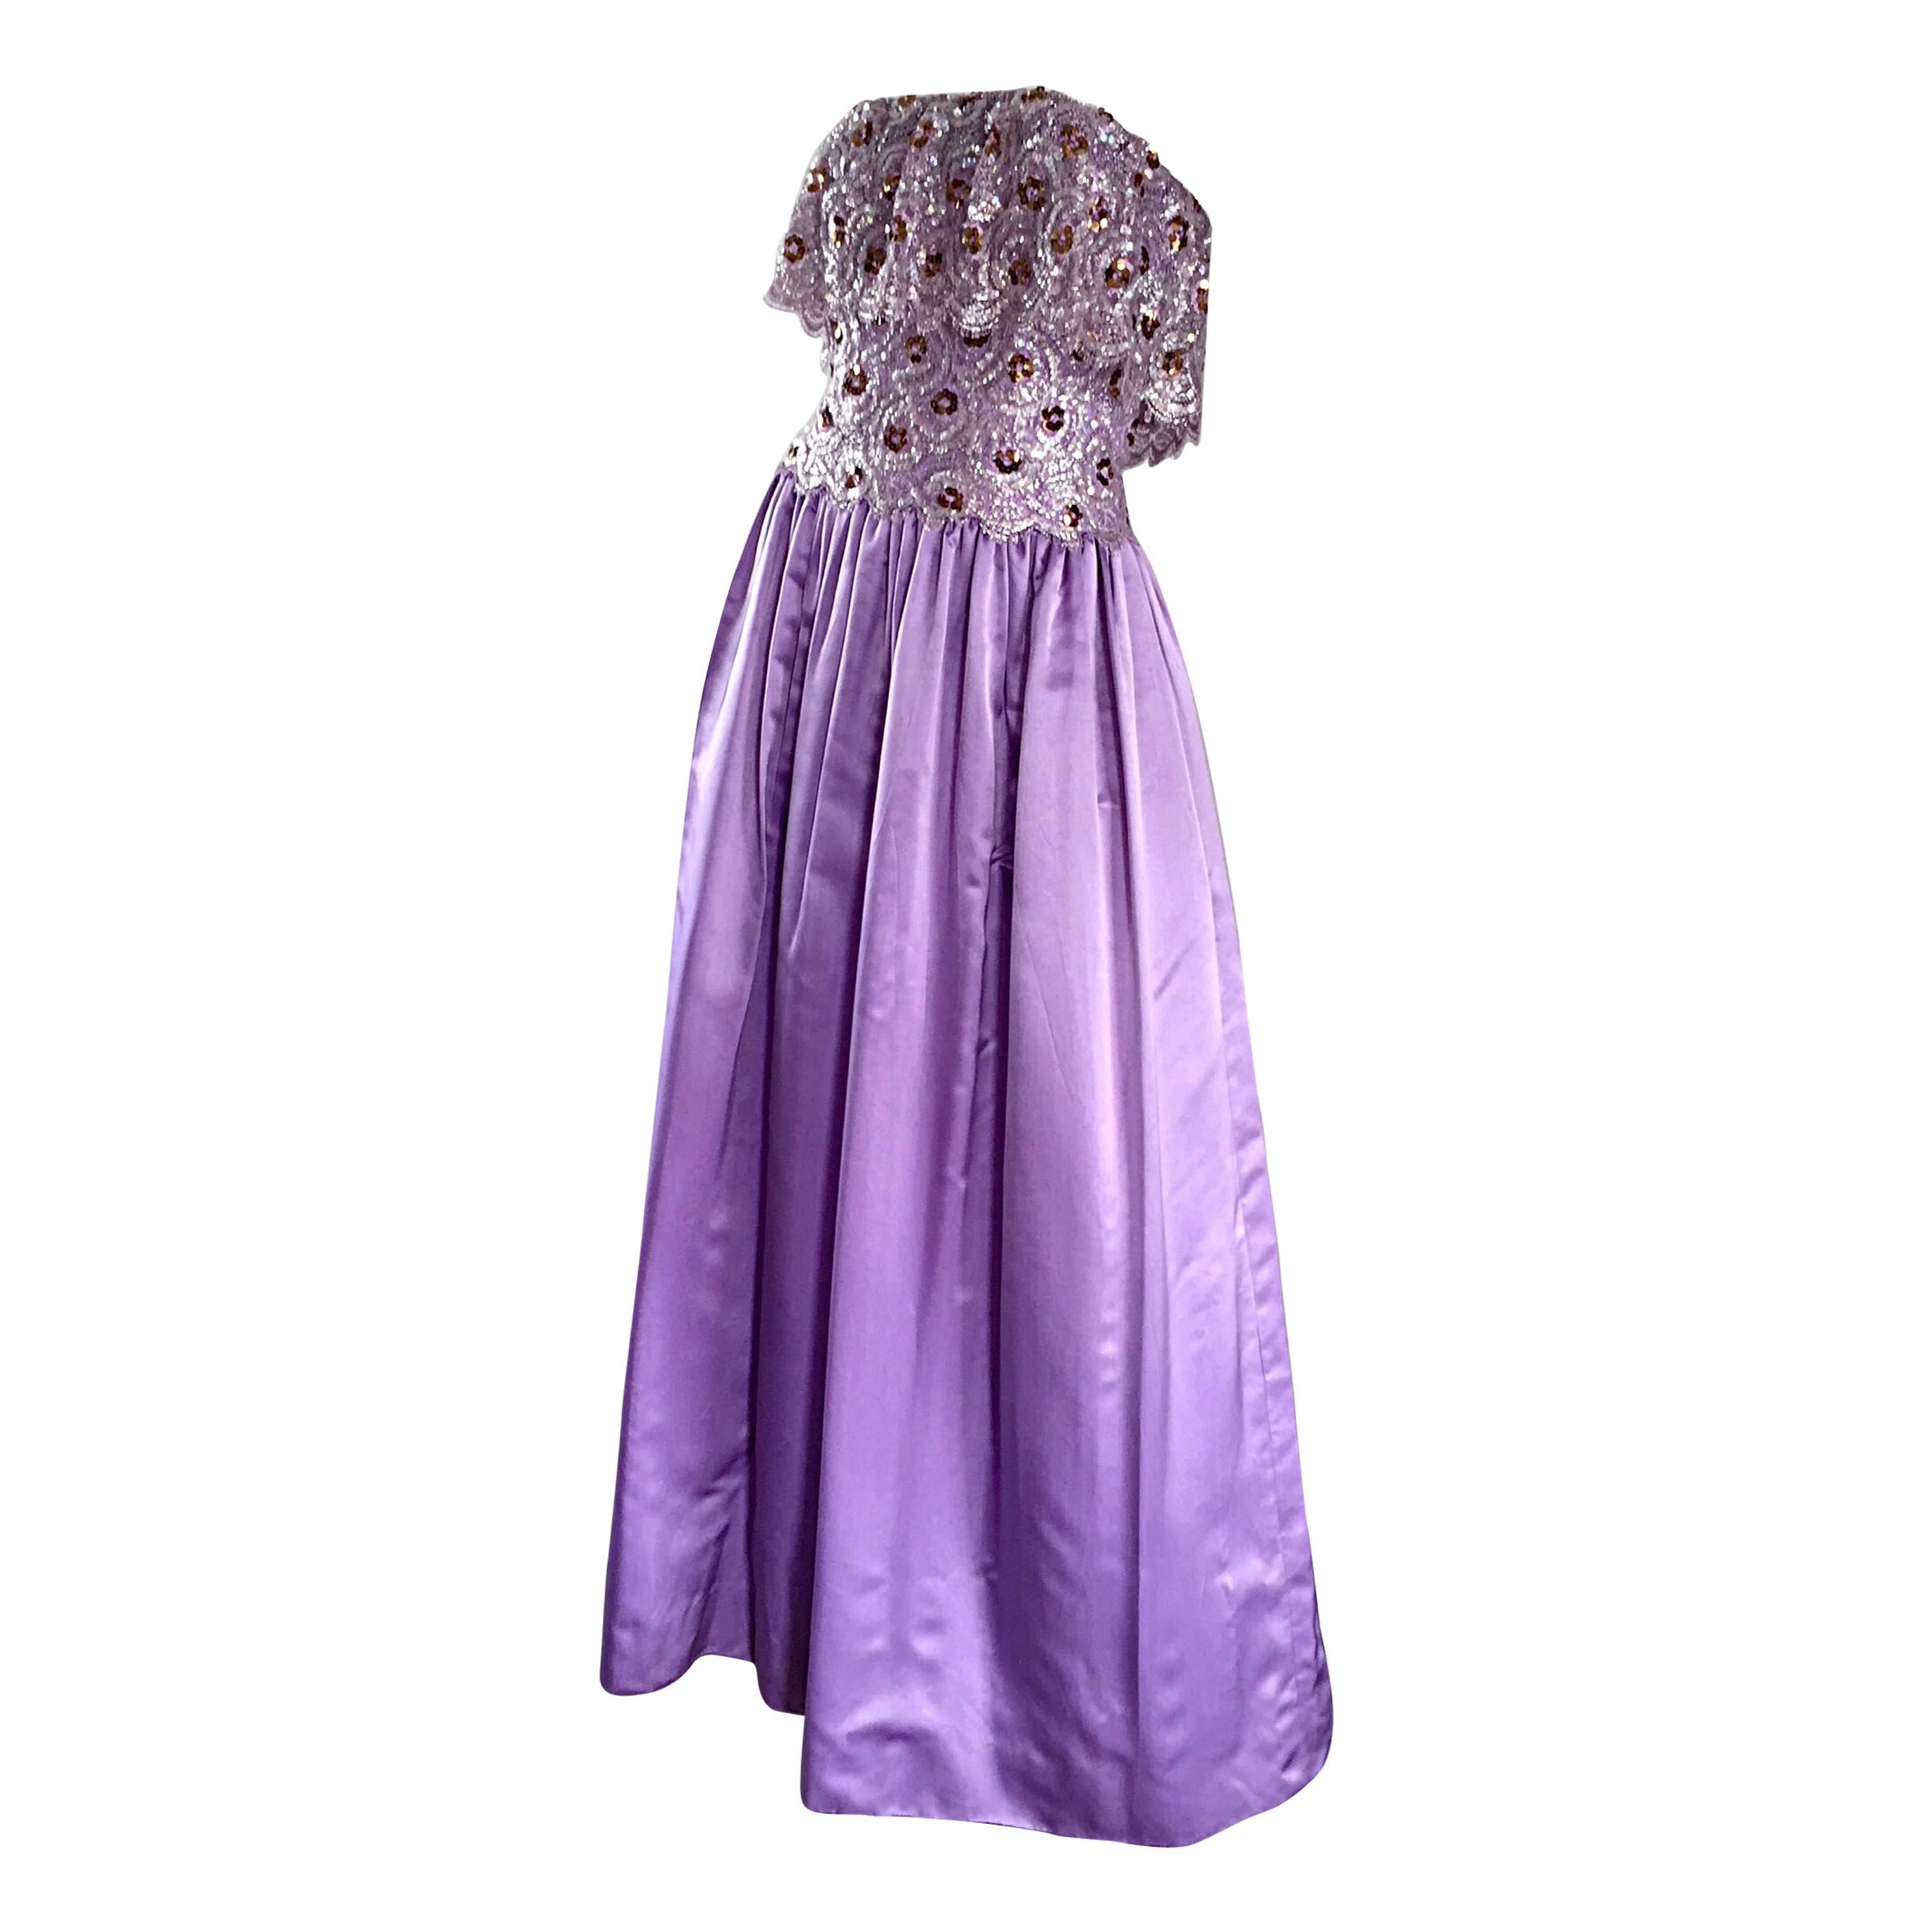 Alfred Bosand 1970s Vintage Purple / Lavender Sequin Silk + Lace 70s Gown For Sale